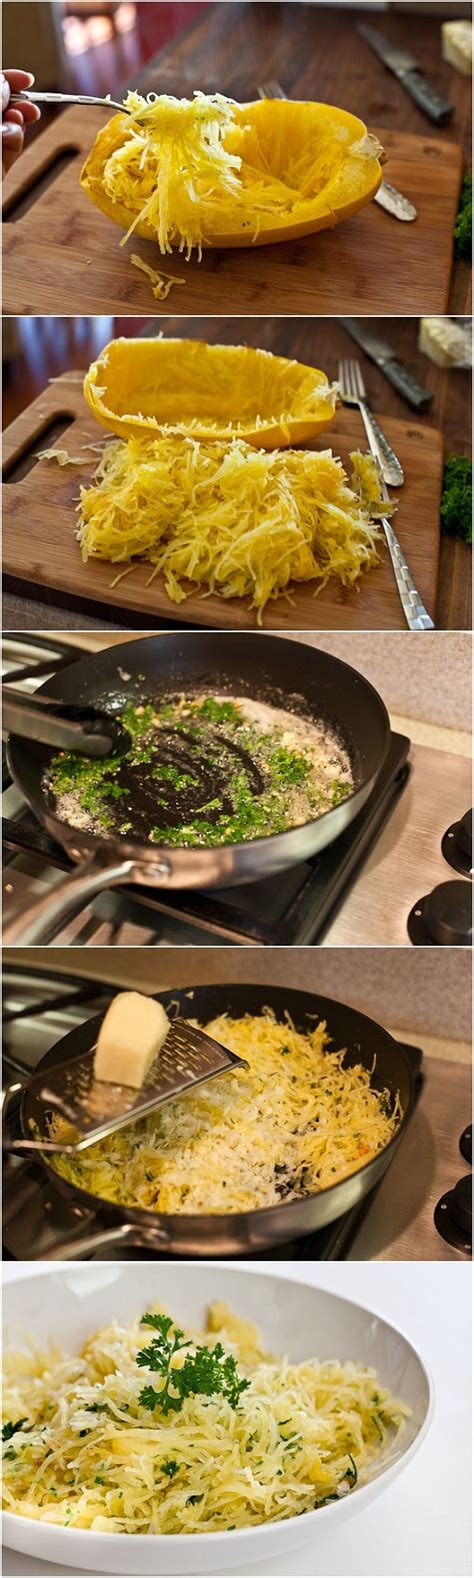 Baked Spaghetti Squash With Garlic And Butter Recipe Quick And Easy Recipes